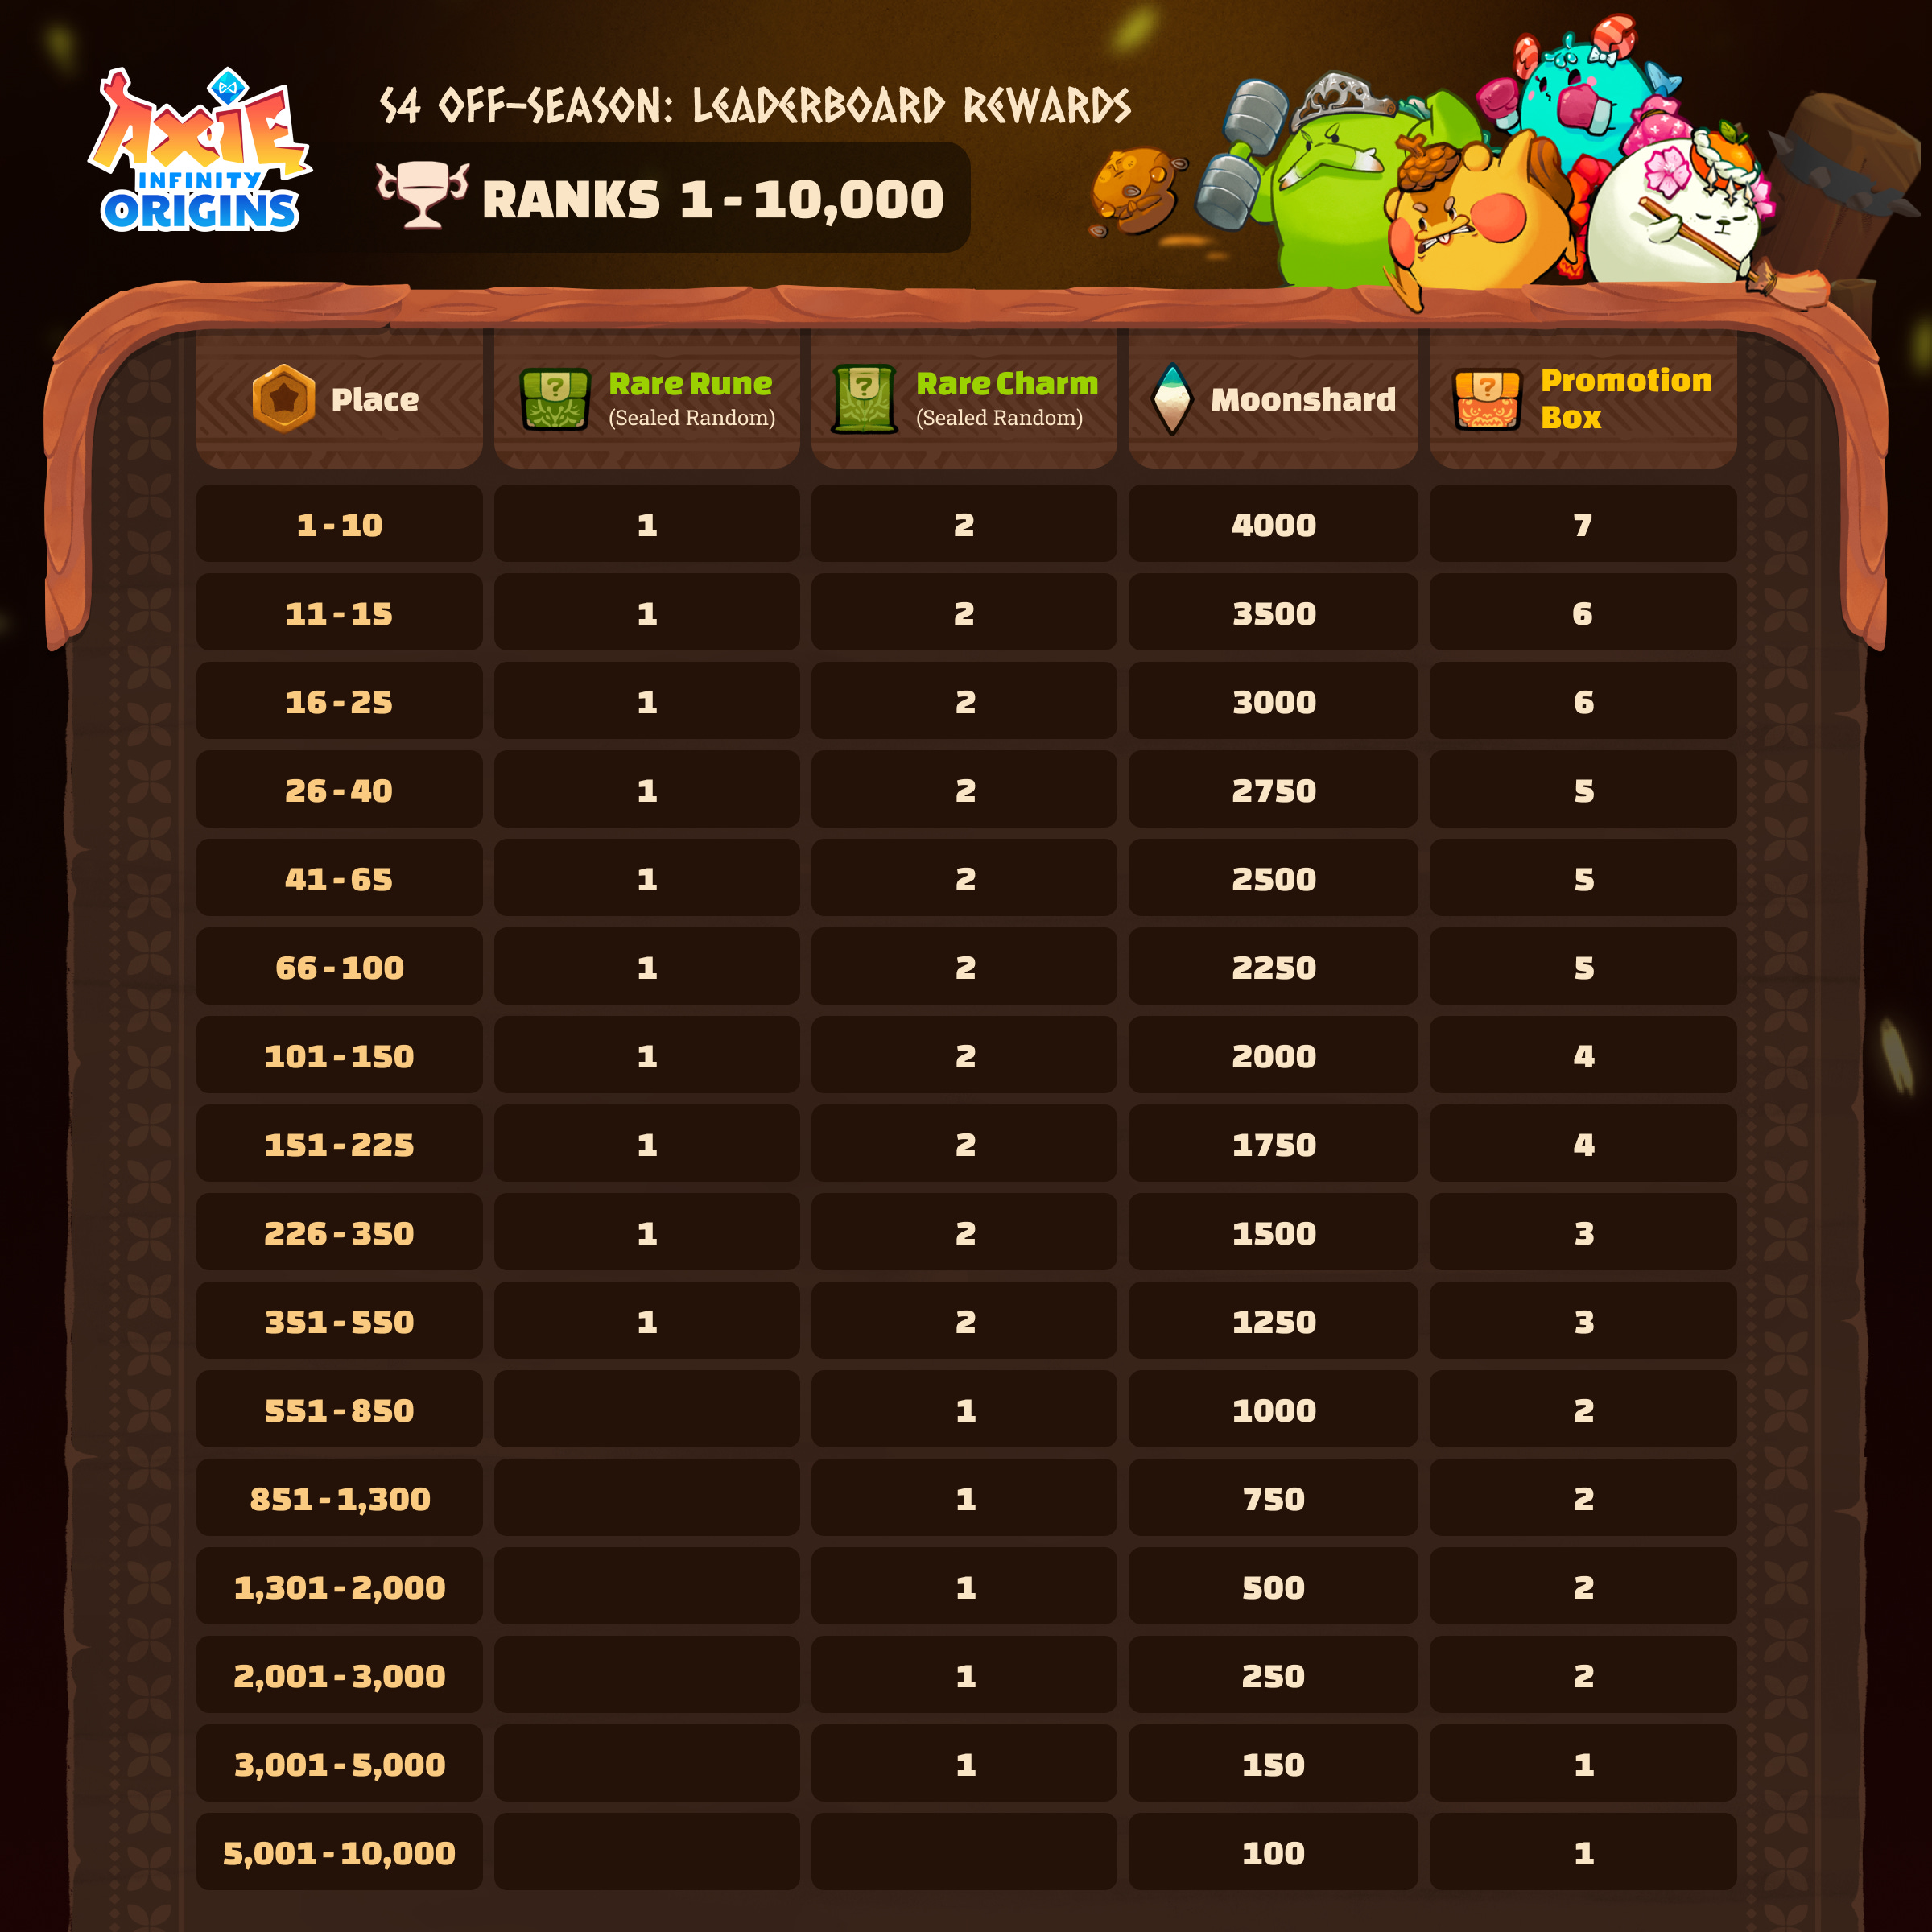 Announcement: Axie iD Card Weekly Leaderboard and Updated Freemints!, by  Gall3ry, Dec, 2023